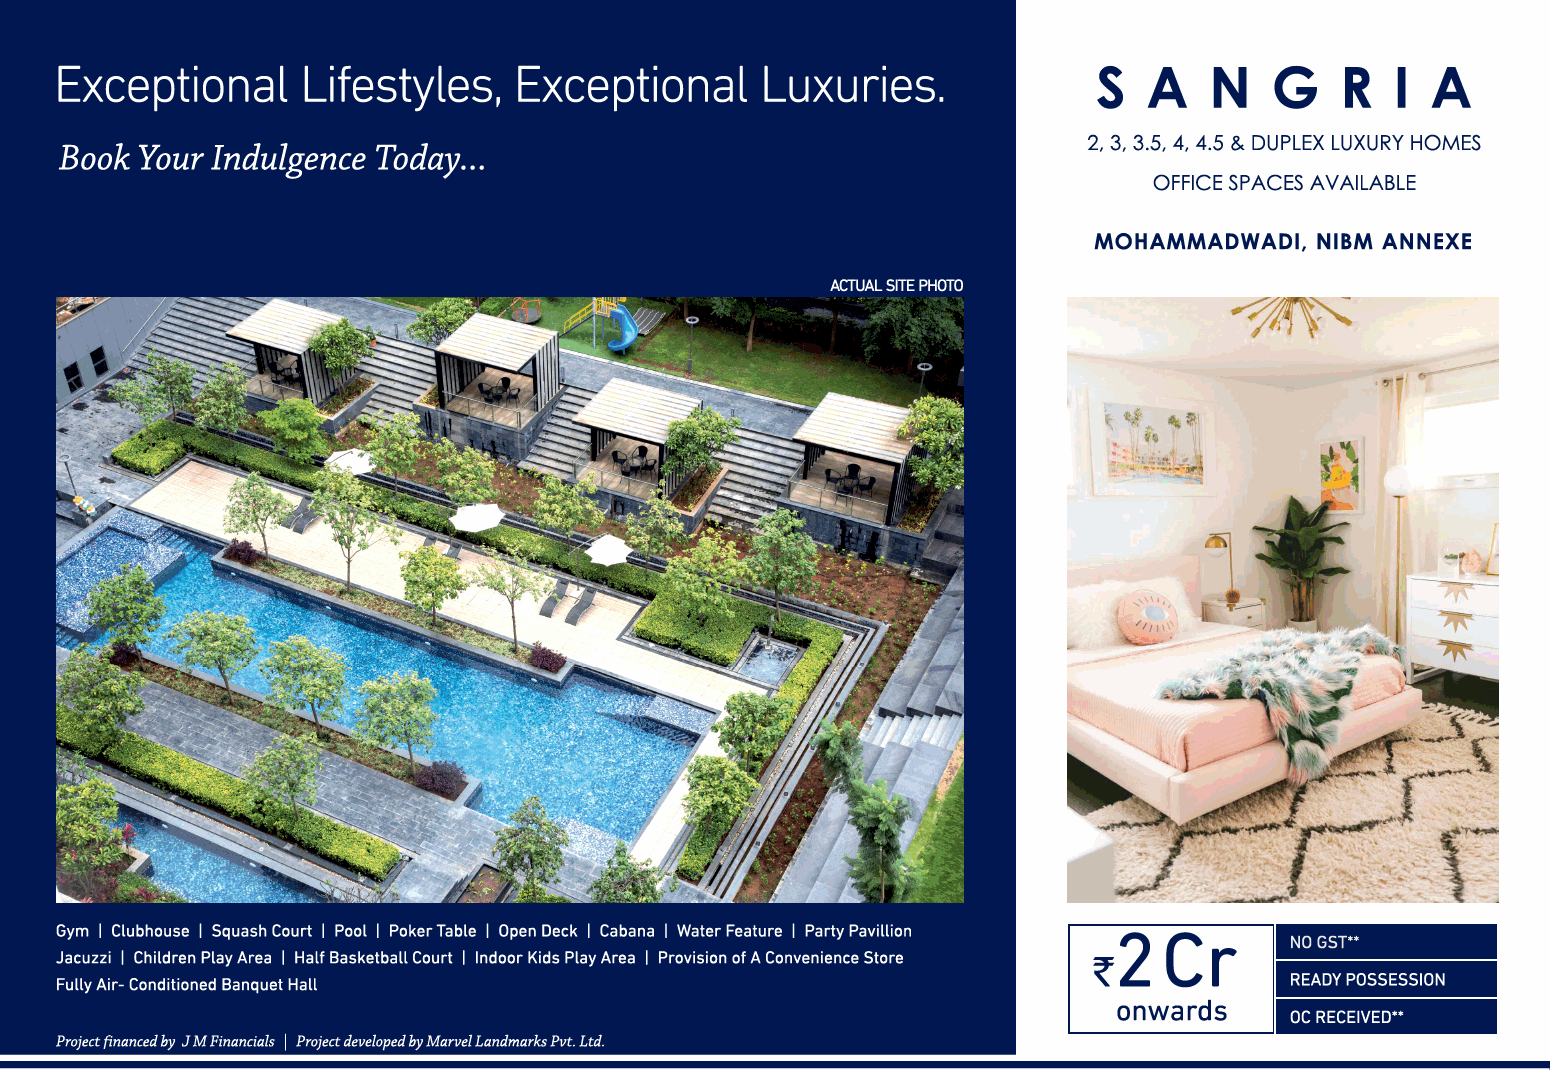 Apartments are ready for possession at Marvel Ganga Sangria in Pune Update